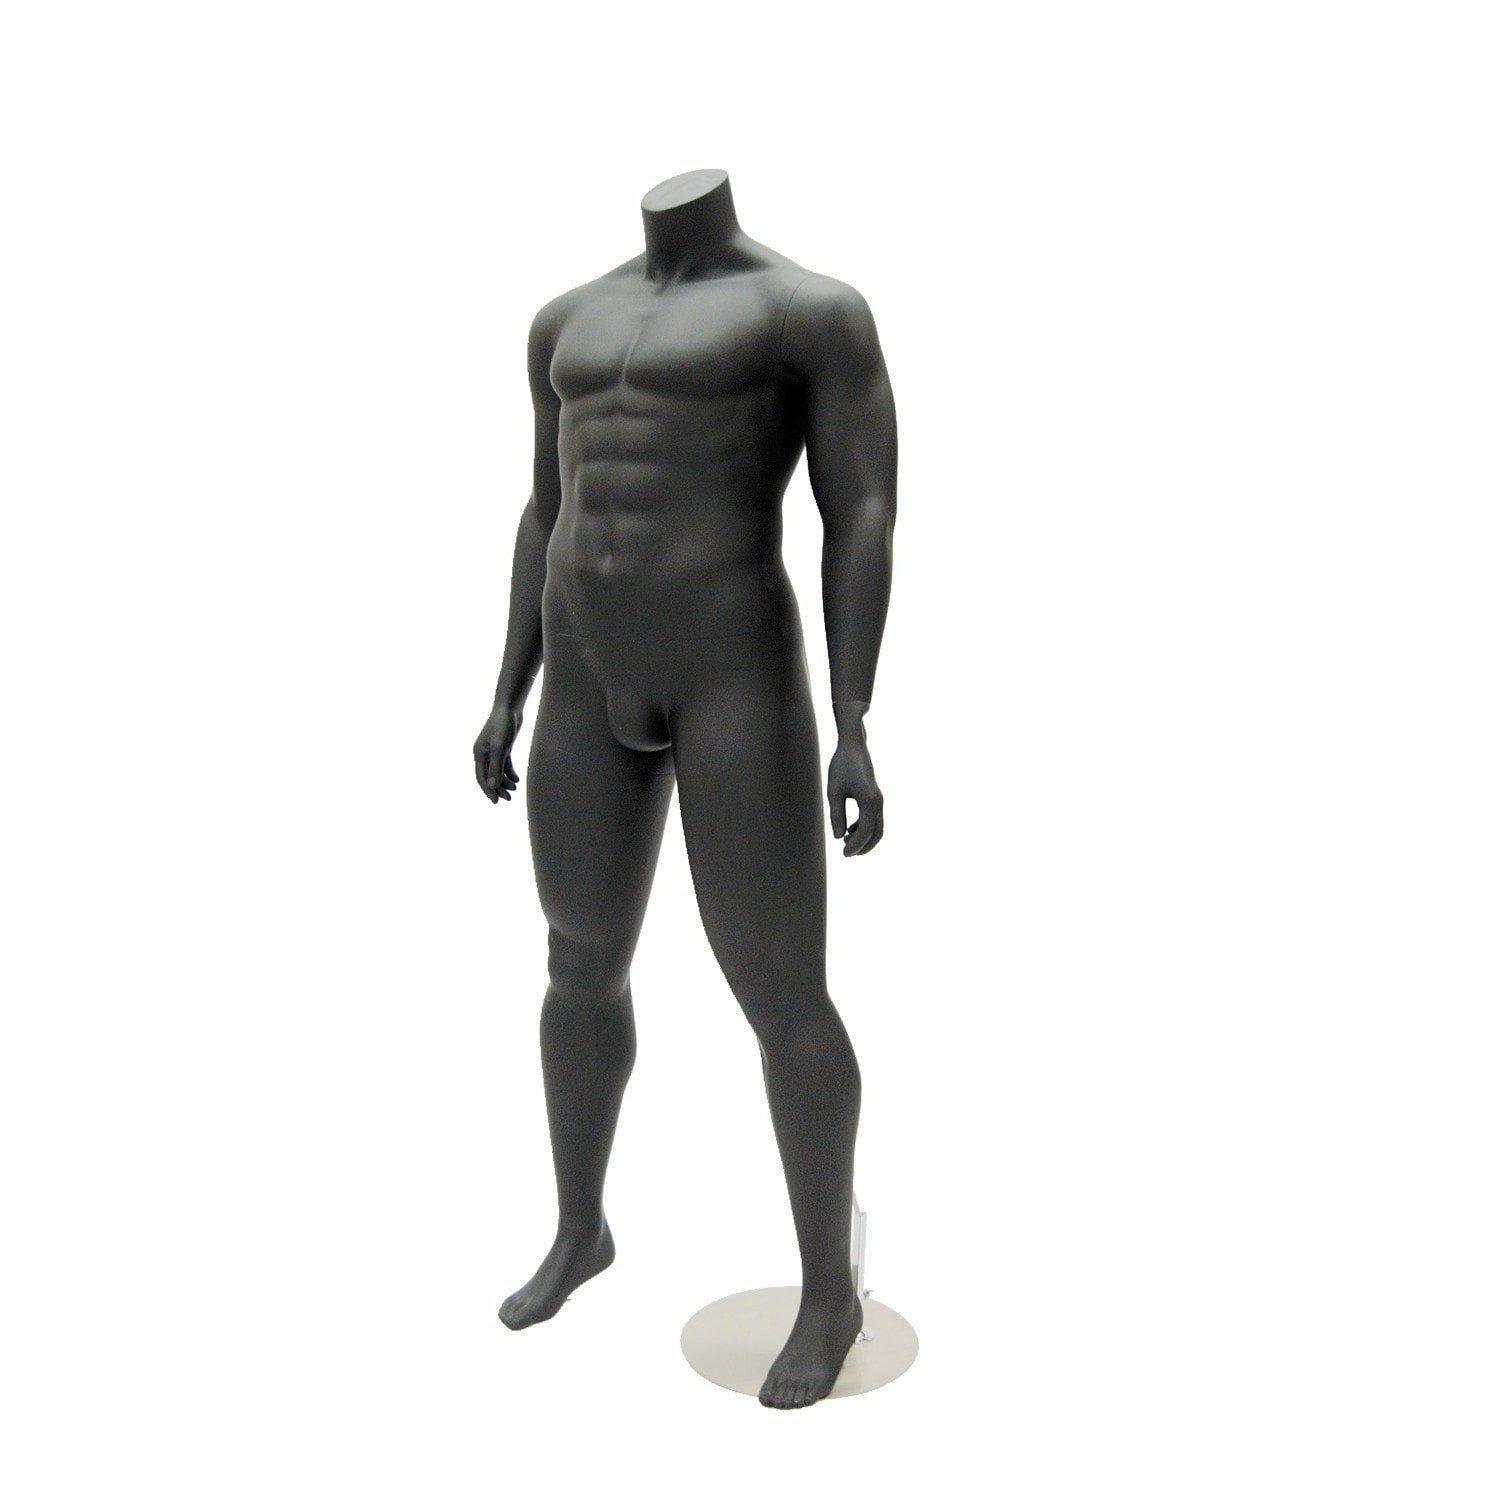 Male Full Body Mannequin in Standing Pose, Black Color